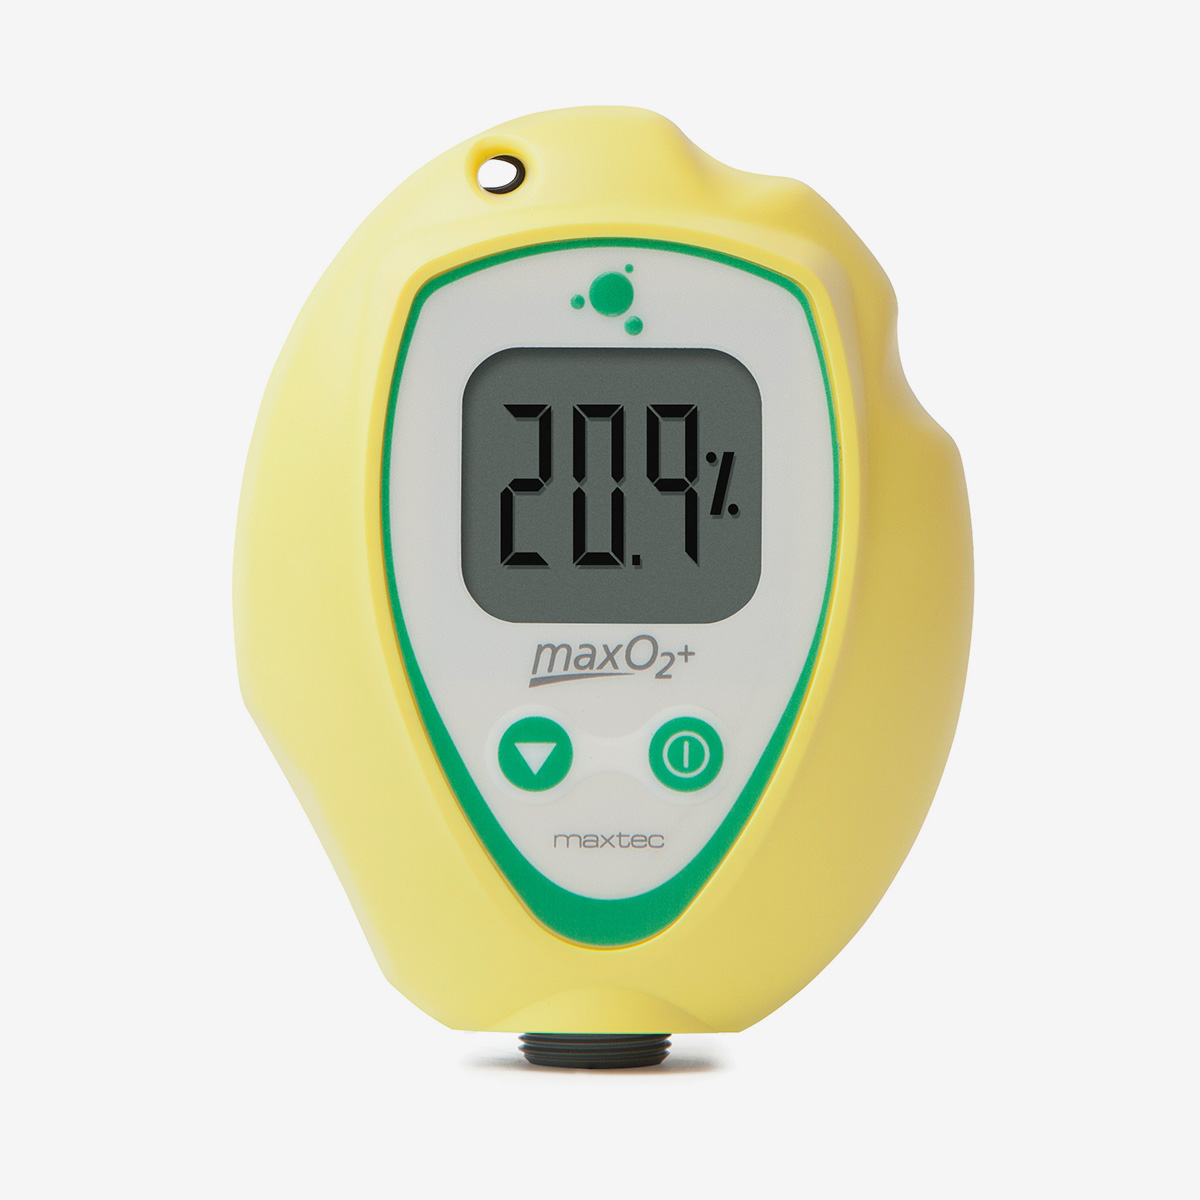 Yellow and green MaxO2+A scuba analyzer front